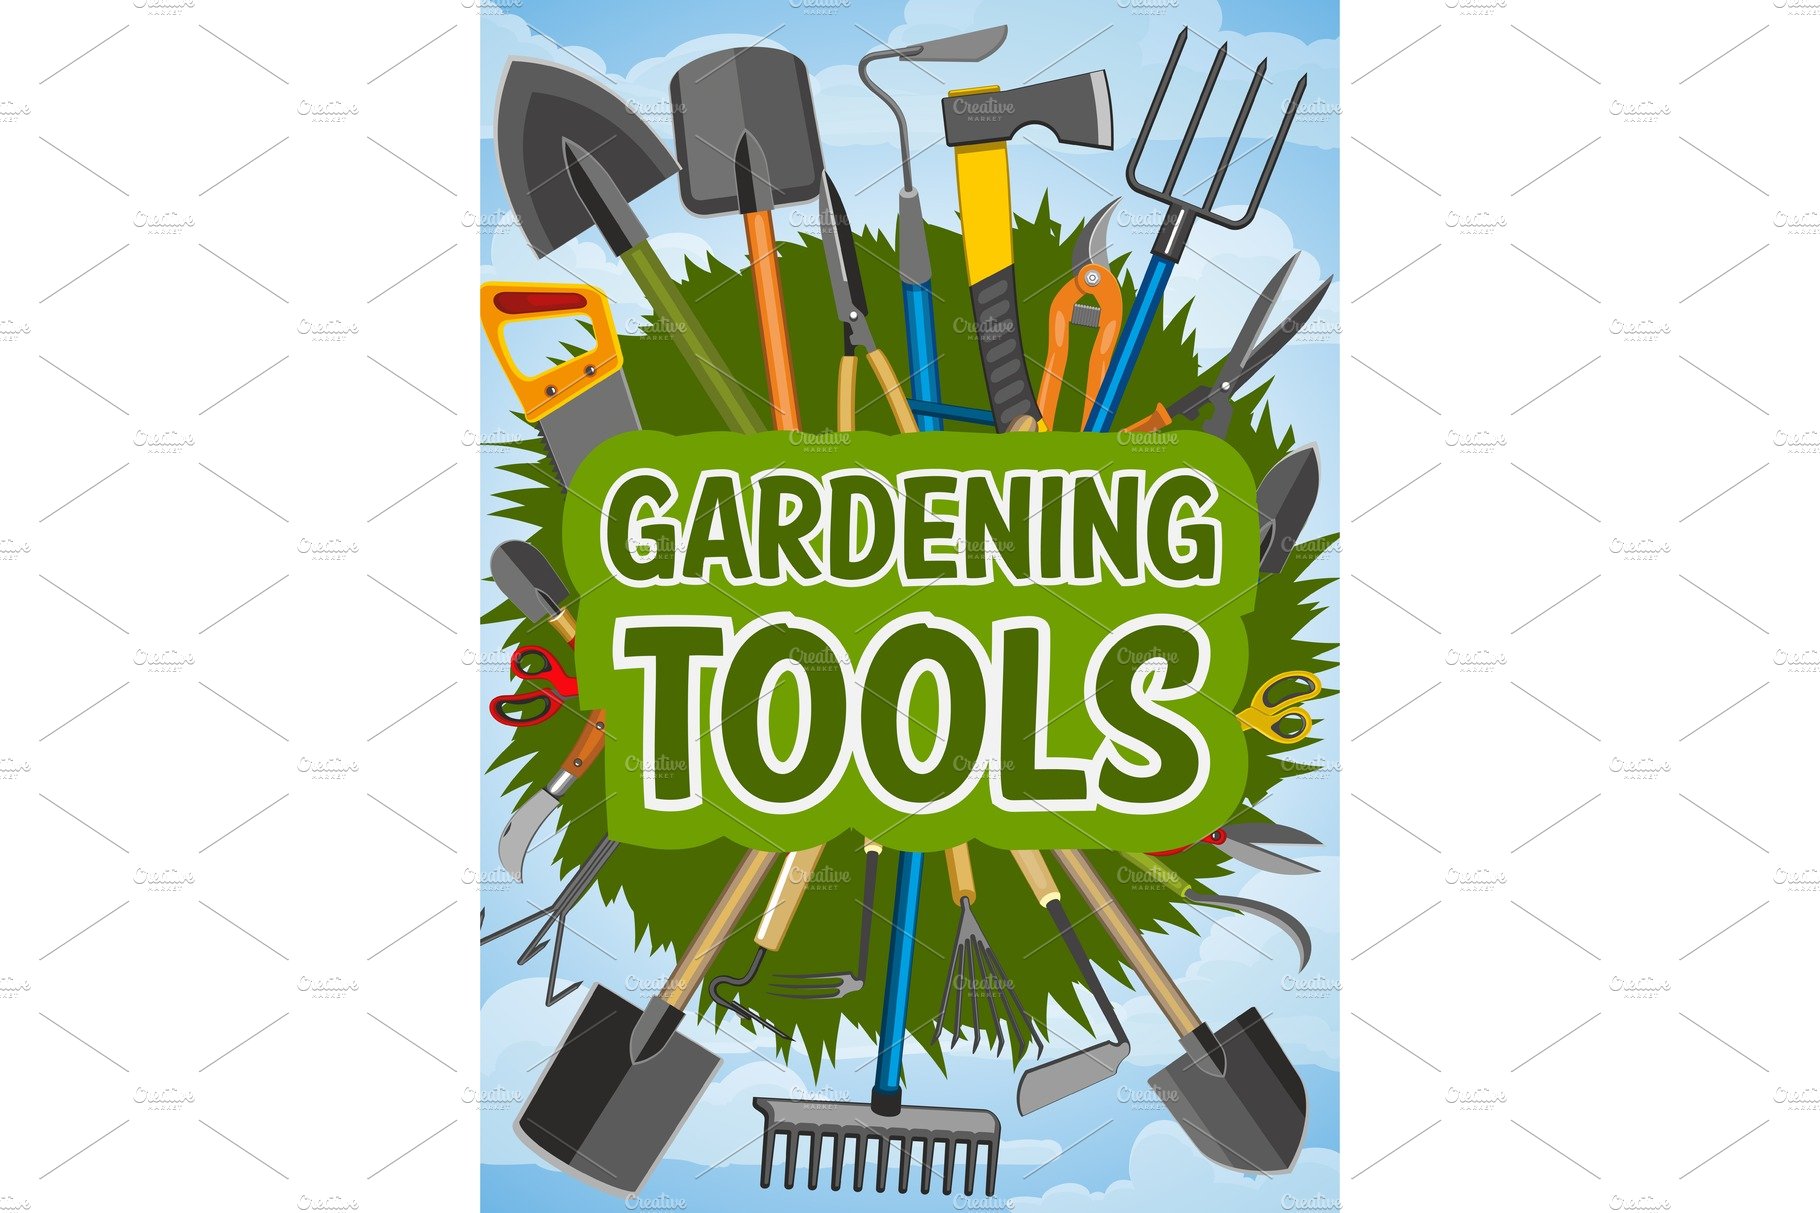 Gardening tools and farming cover image.